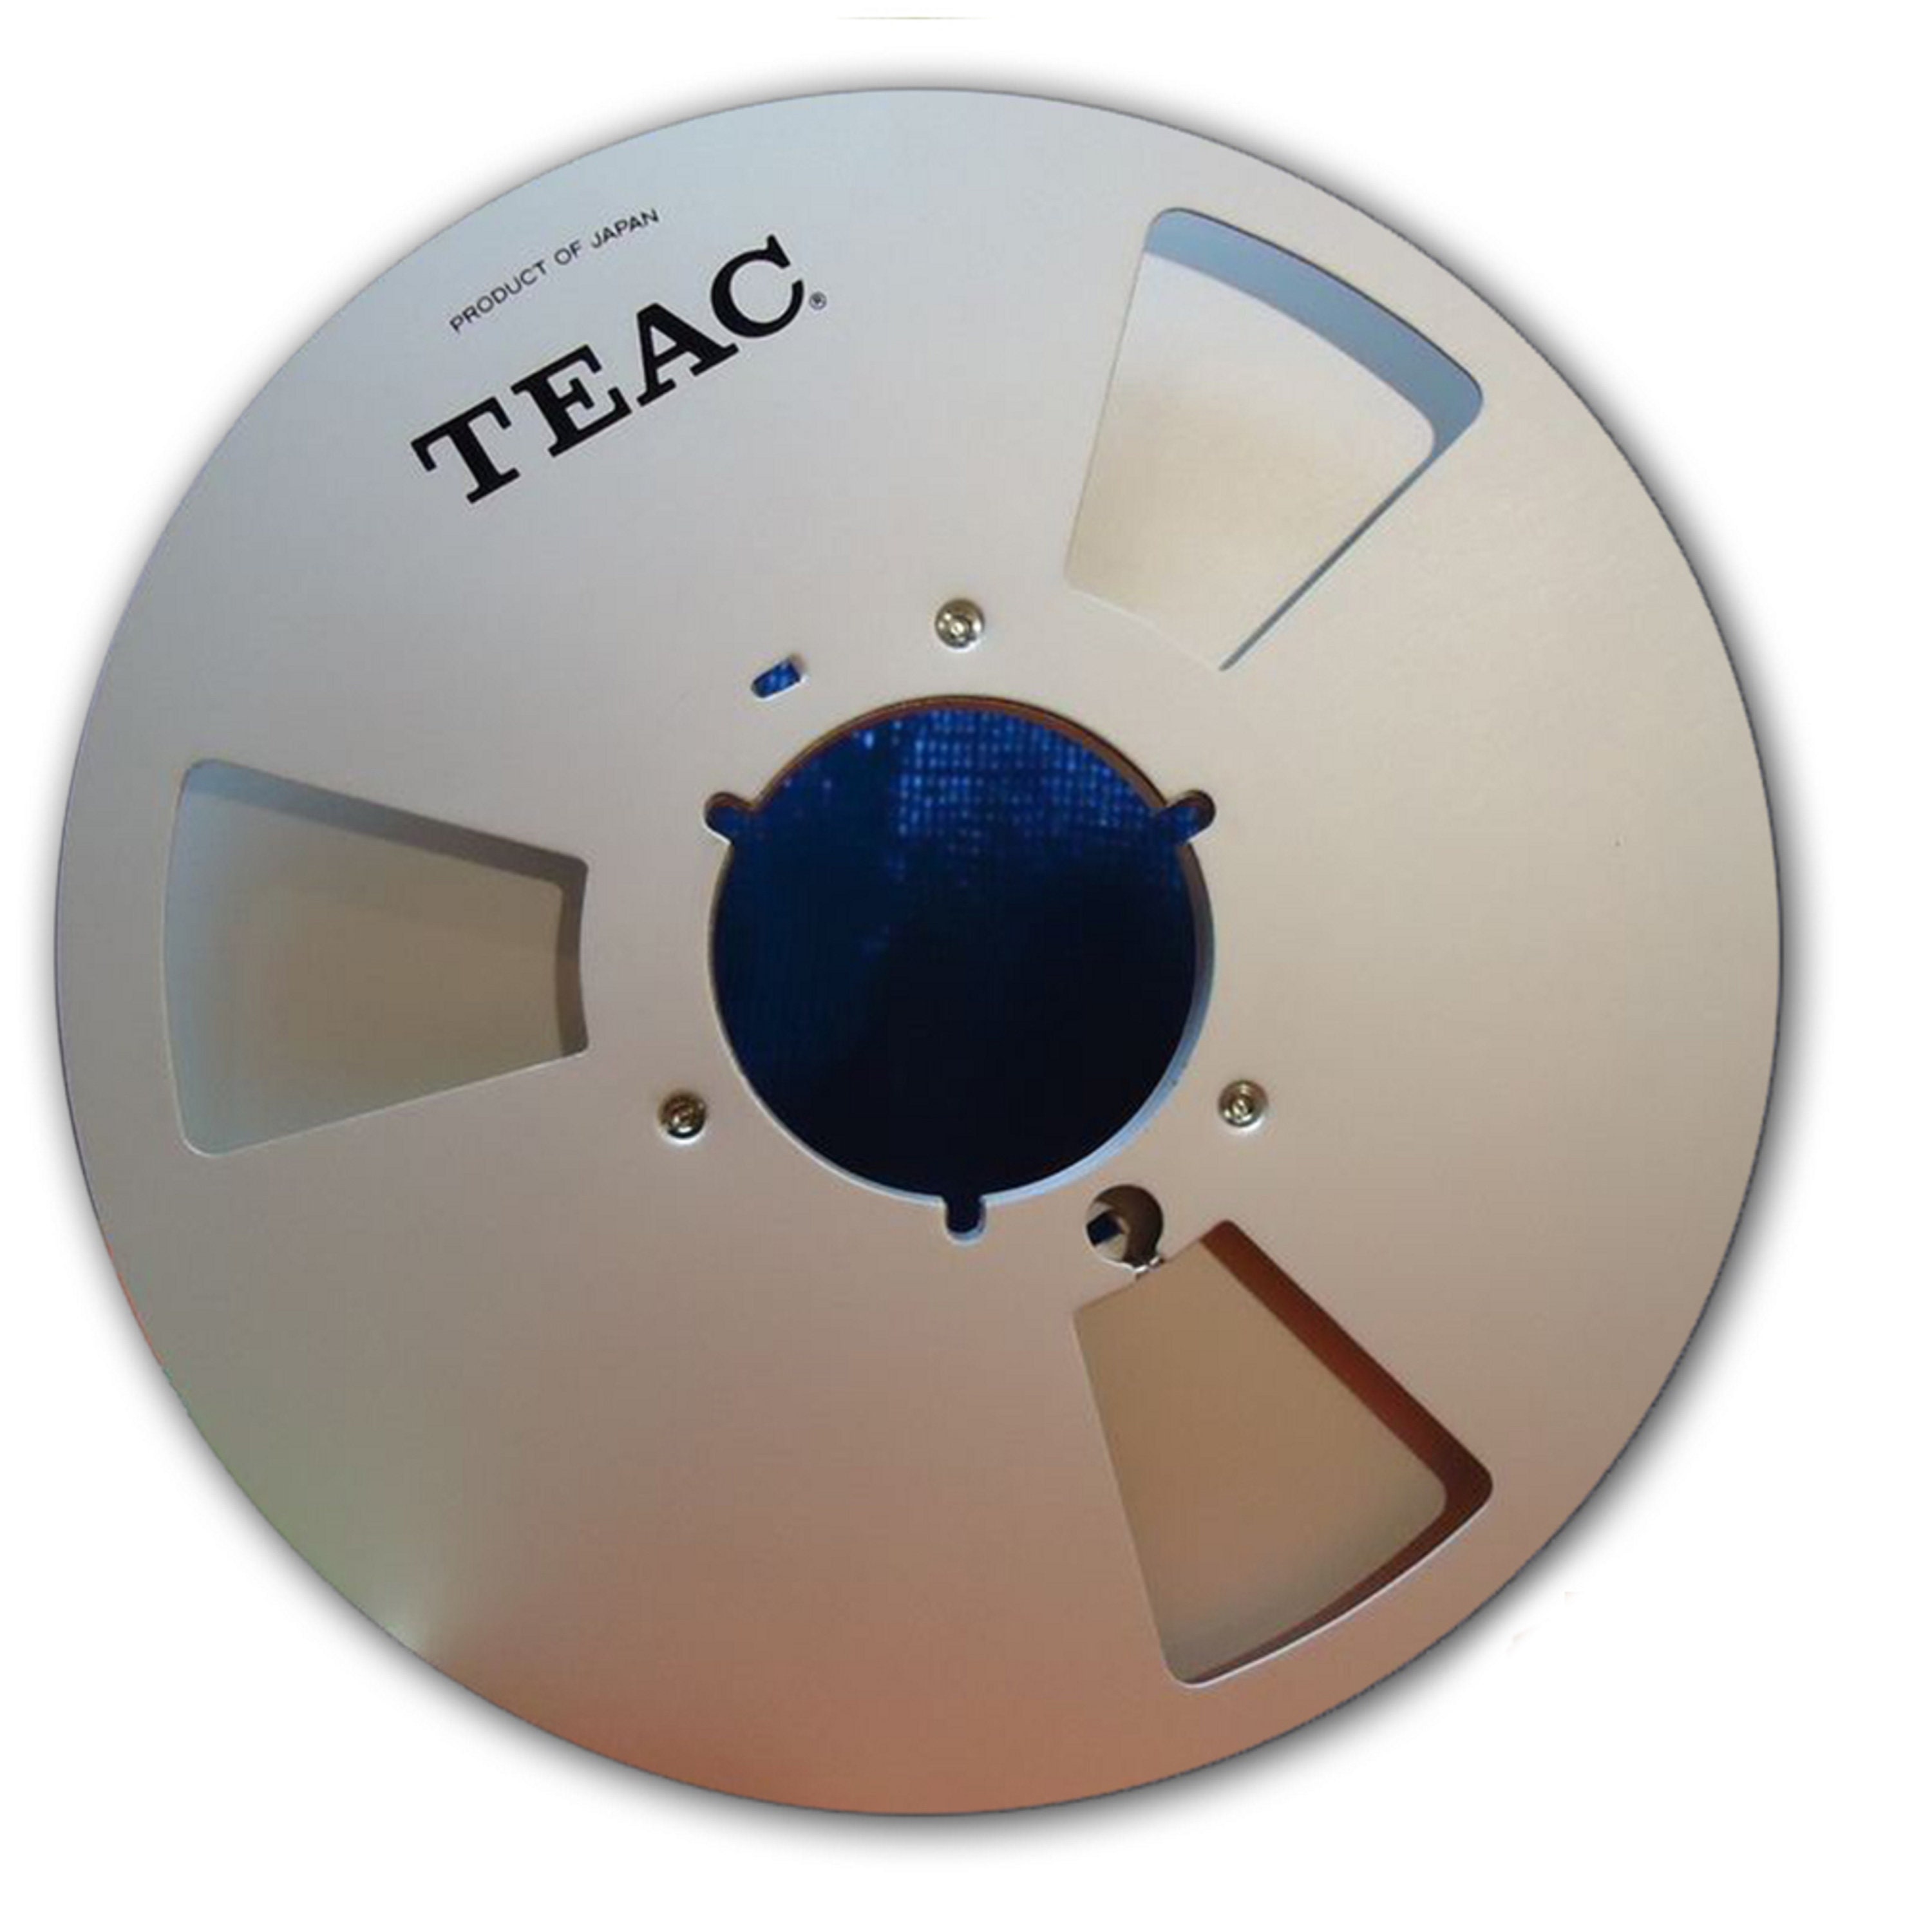  Empty Tape Reel, 7in Open Reel Audio Aluminum Takeup Reel  Recorder Accessory Opening Machine Part Opener Empty Plate for TEAC  (Silver) : Electronics